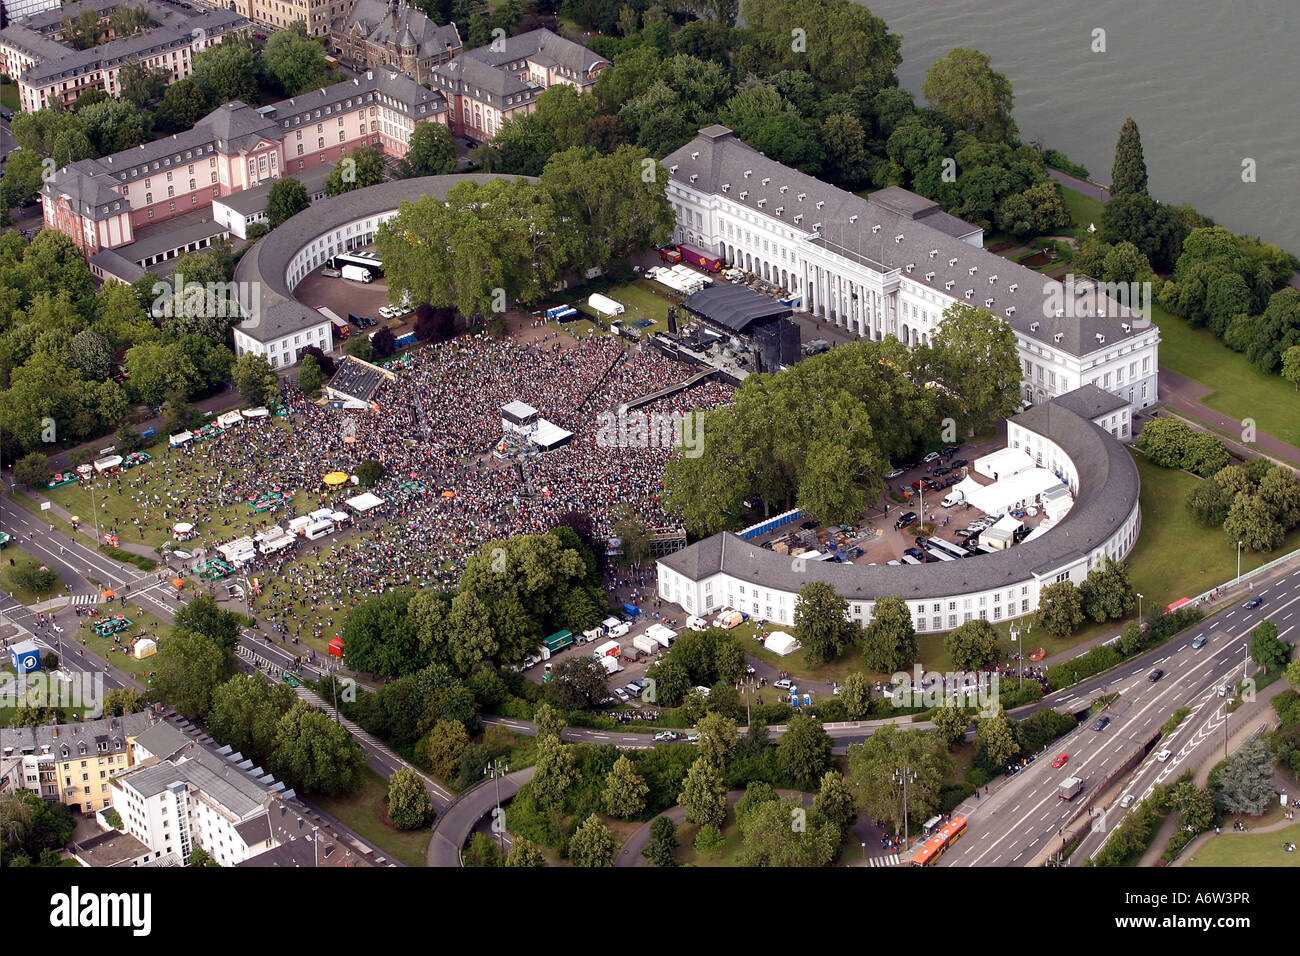 40 000 spectators in front of the castle at a concert of Herbert Groenemeyer in Koblenz, Rhineland-Palatinate, germany Stock Photo